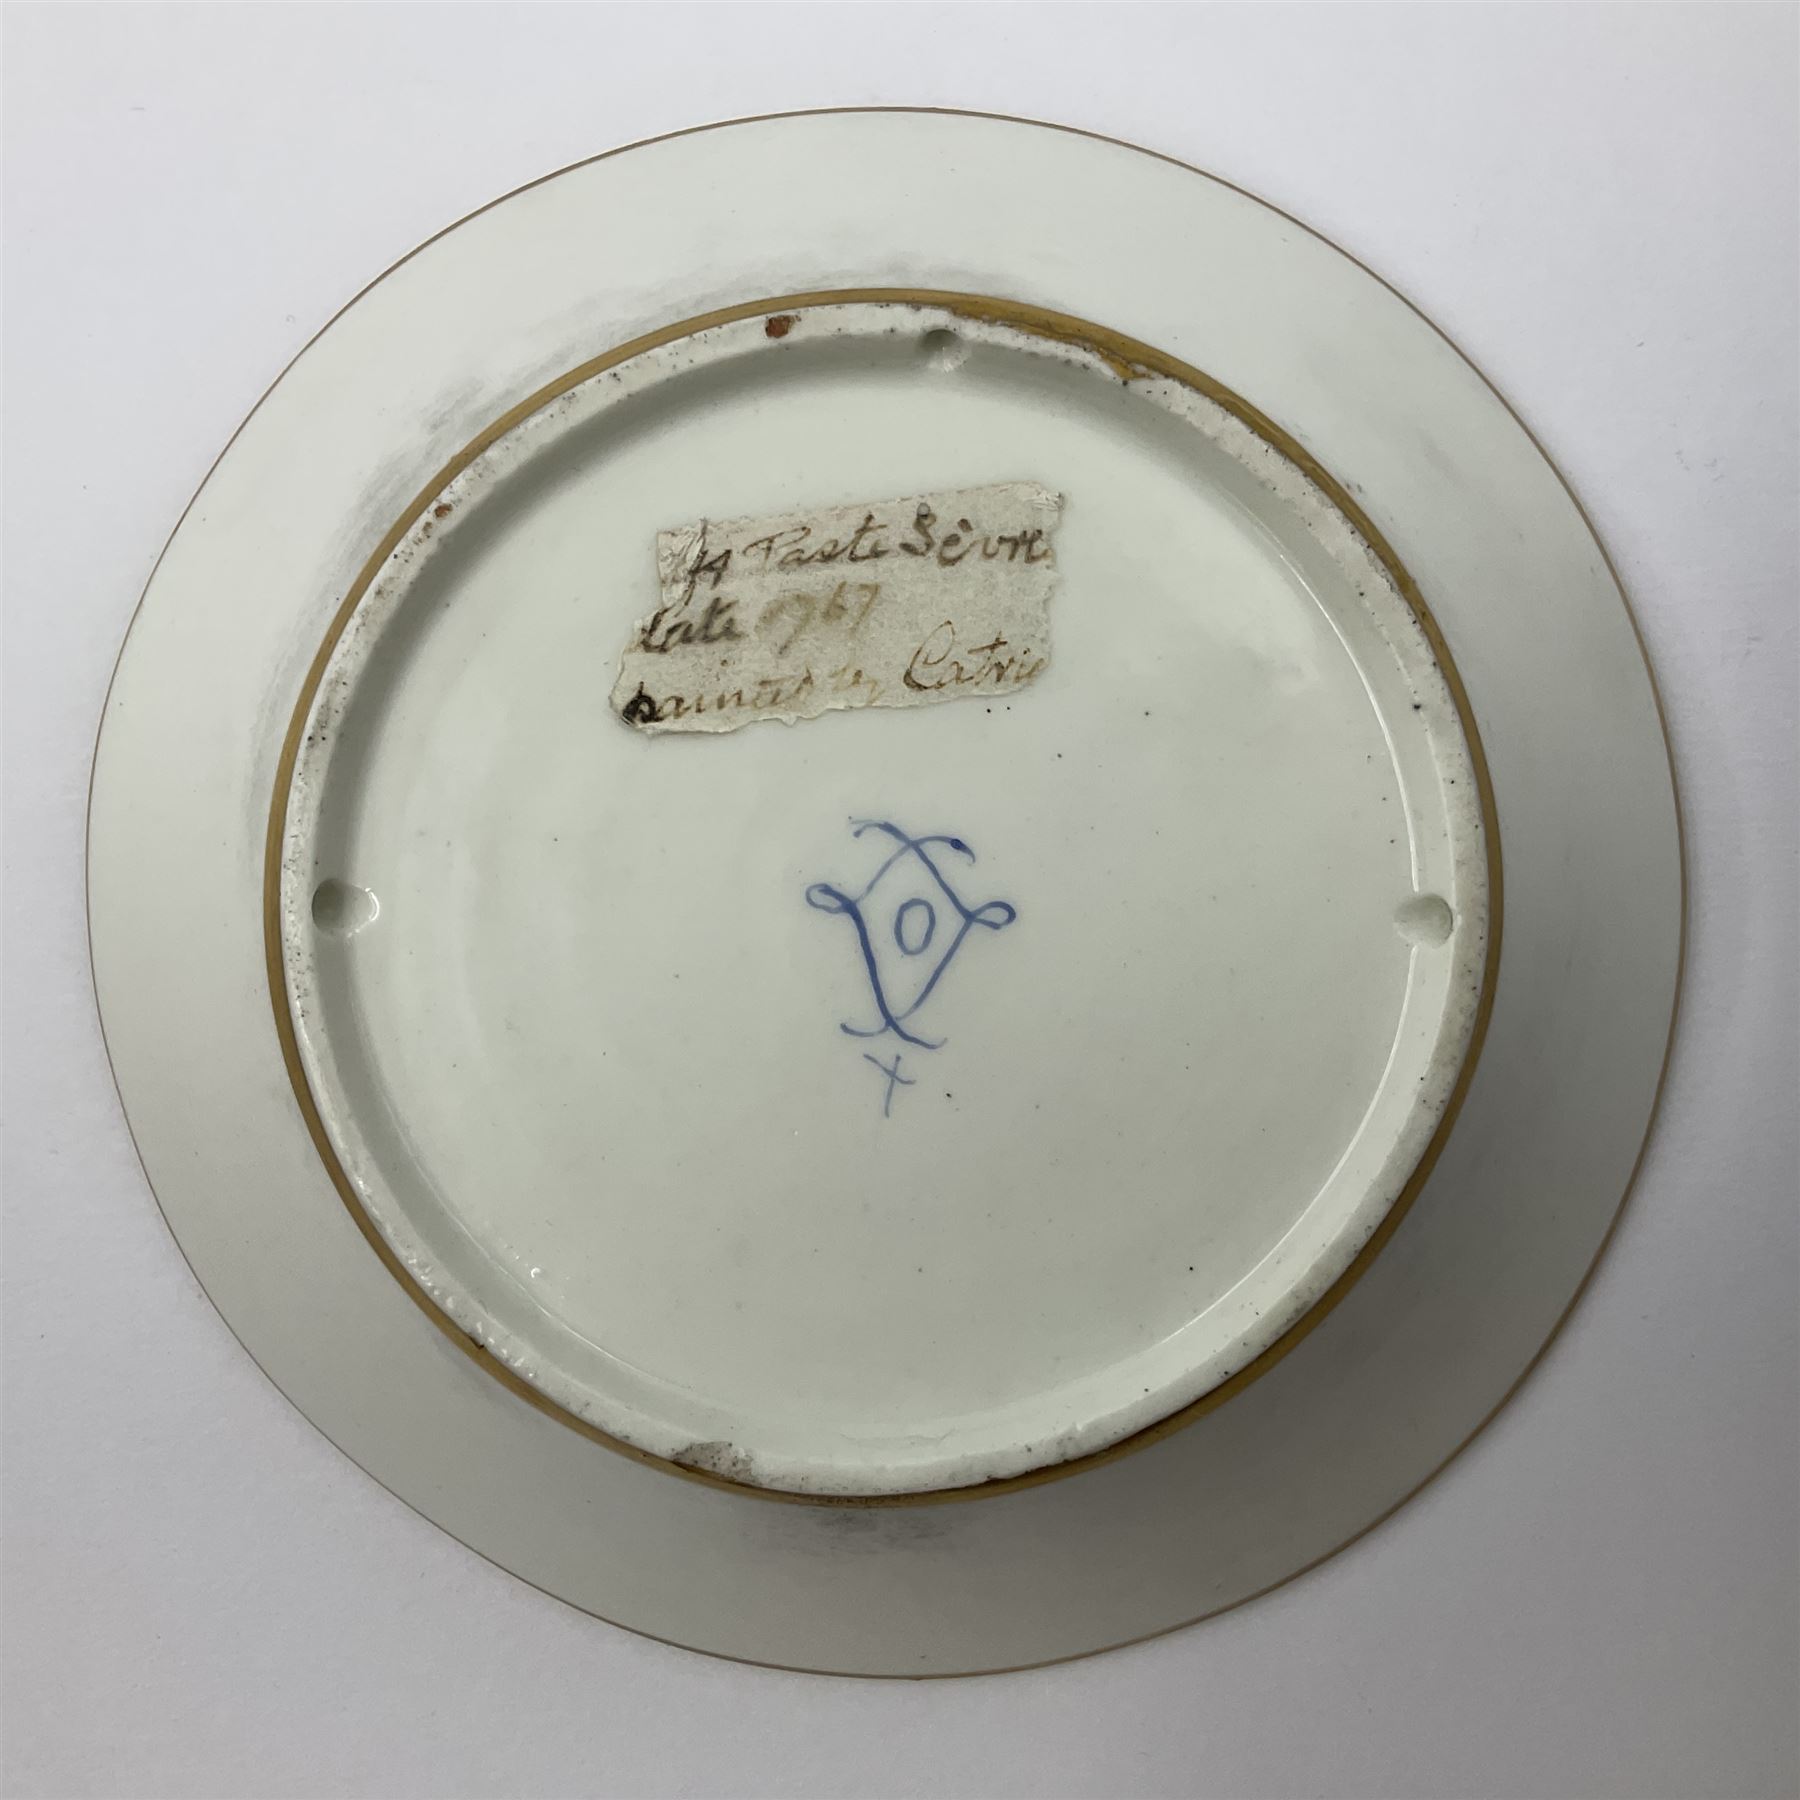 Sevres soft paste porcelain coffee can and saucer with date code for 1767 - Image 7 of 16